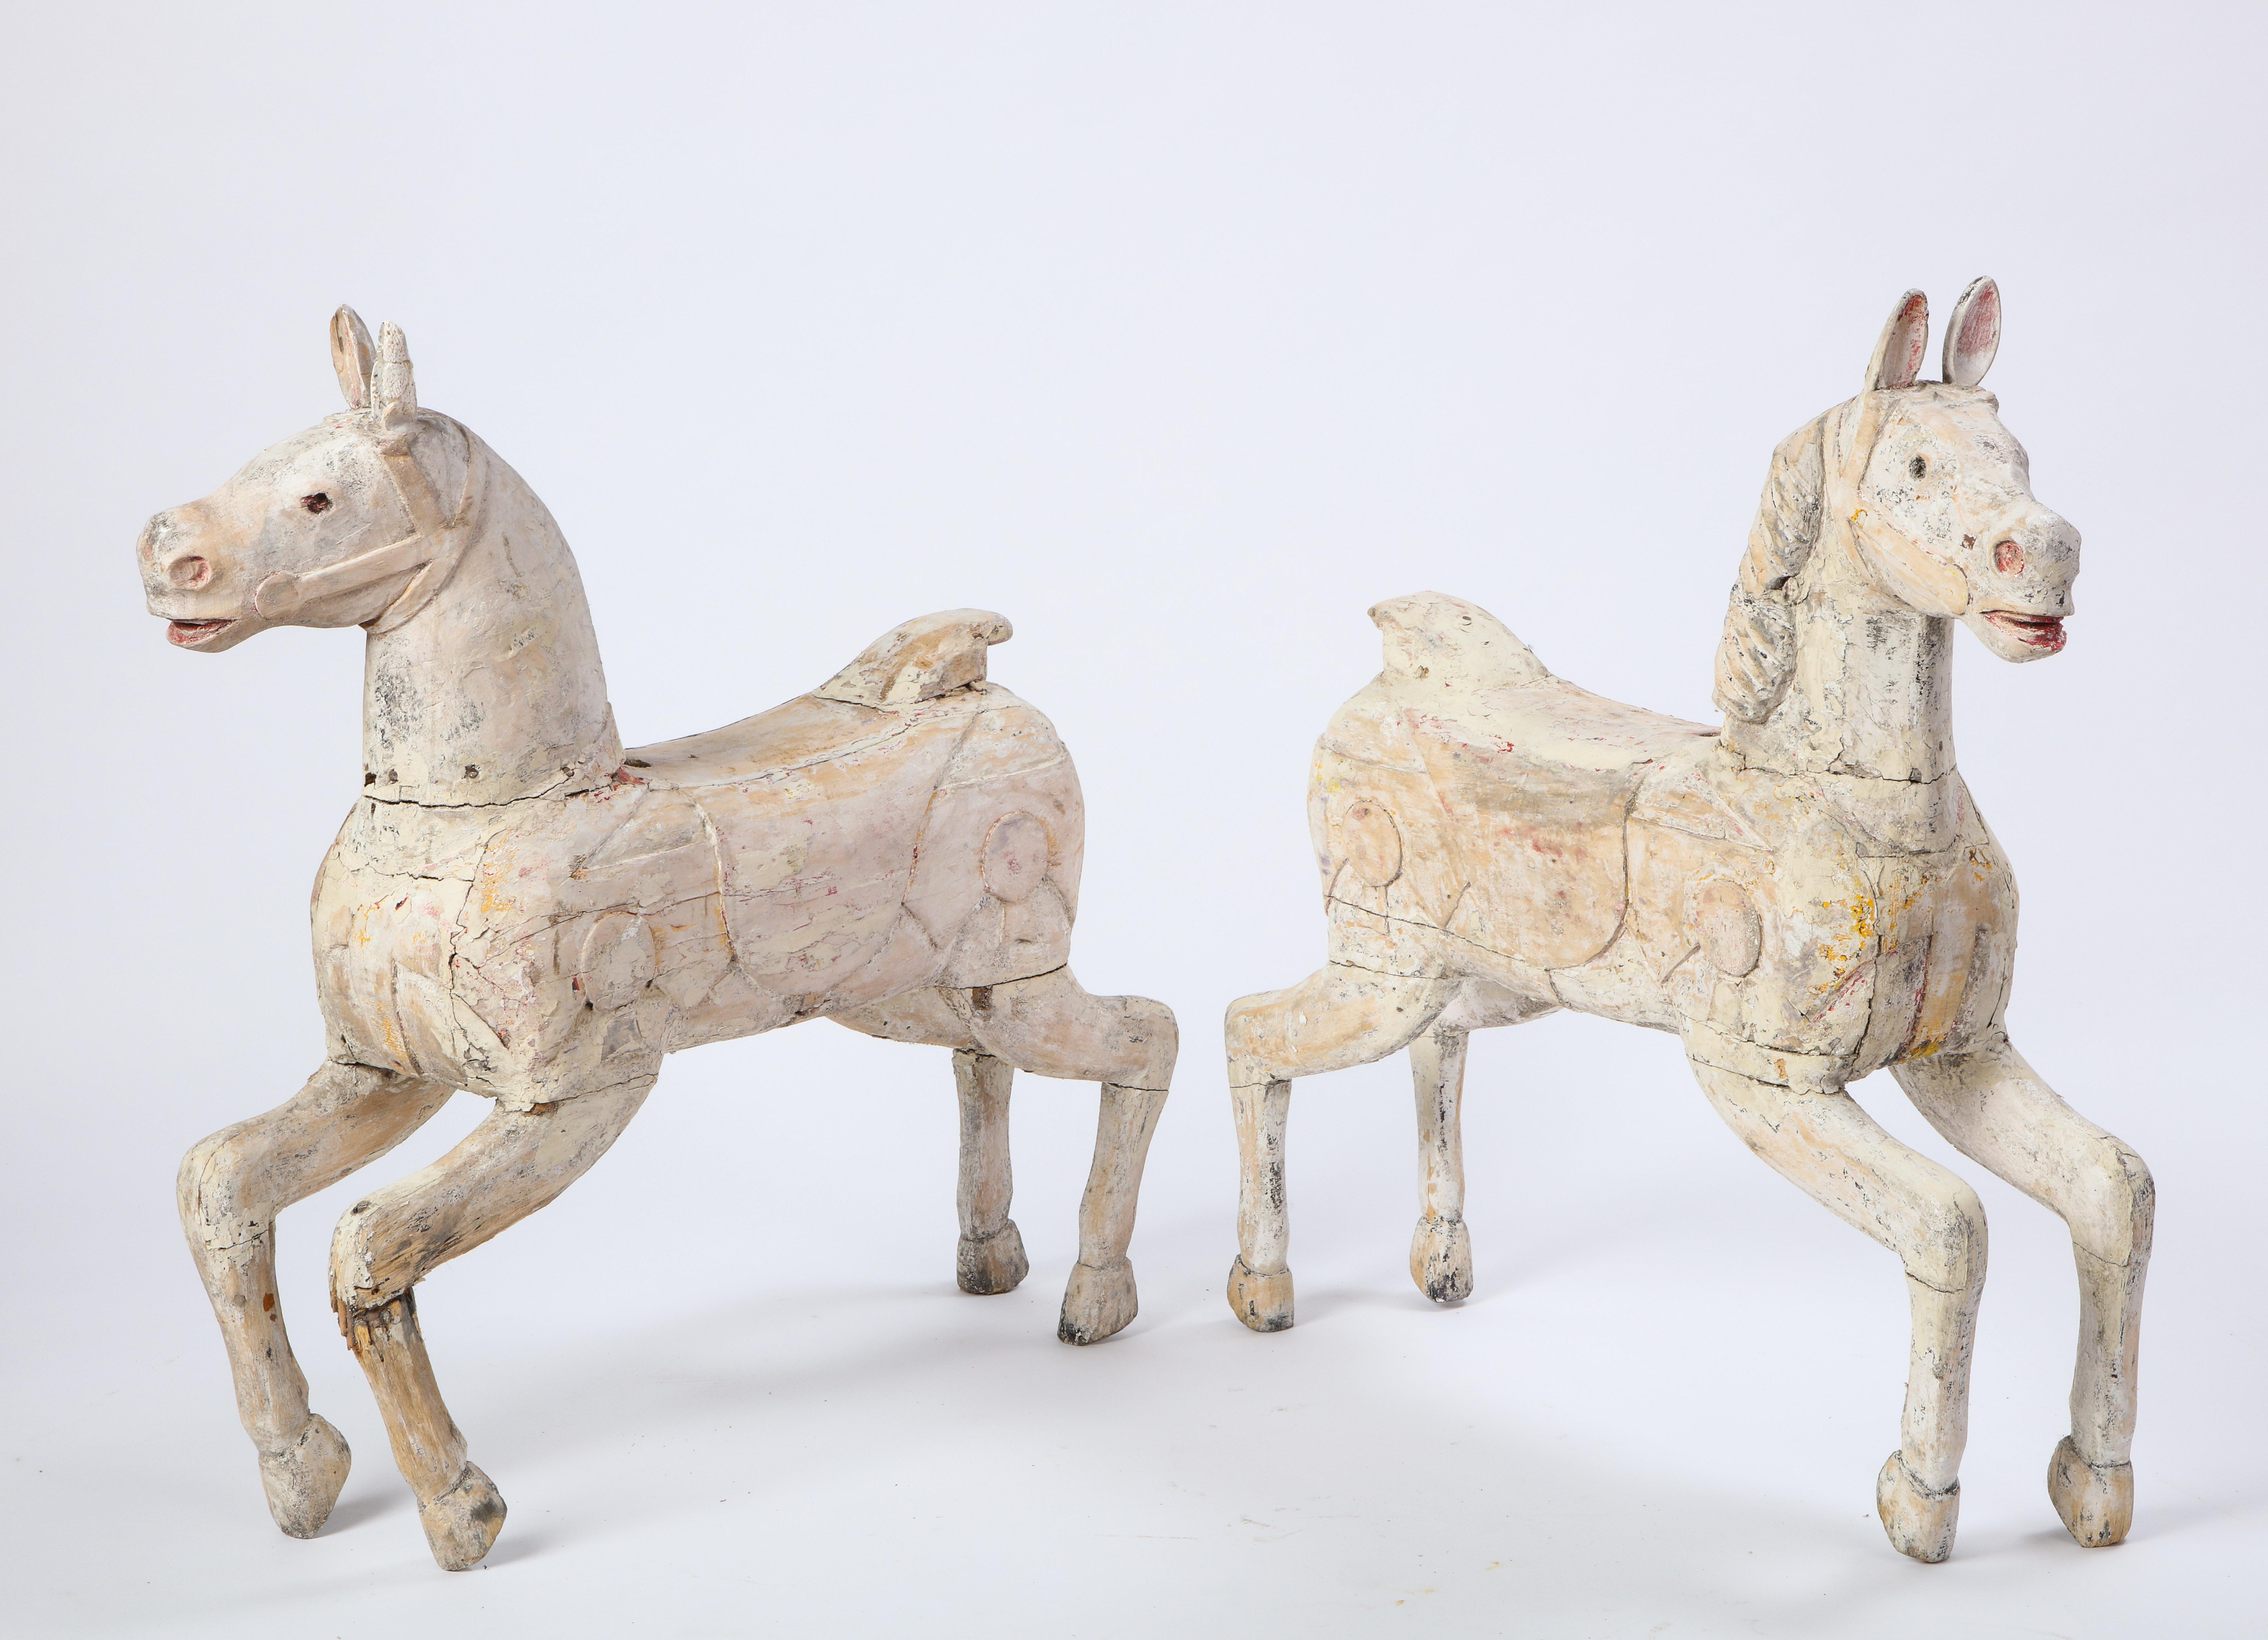 A pair of white-painted carved wood carousel horses from the 20th century. Each is modeled after a prancing horse, and measures H 33 in. x W 31.25 in. x D 8 in. The petite horses exude a playful quality and charm and the whitewashed surface adds